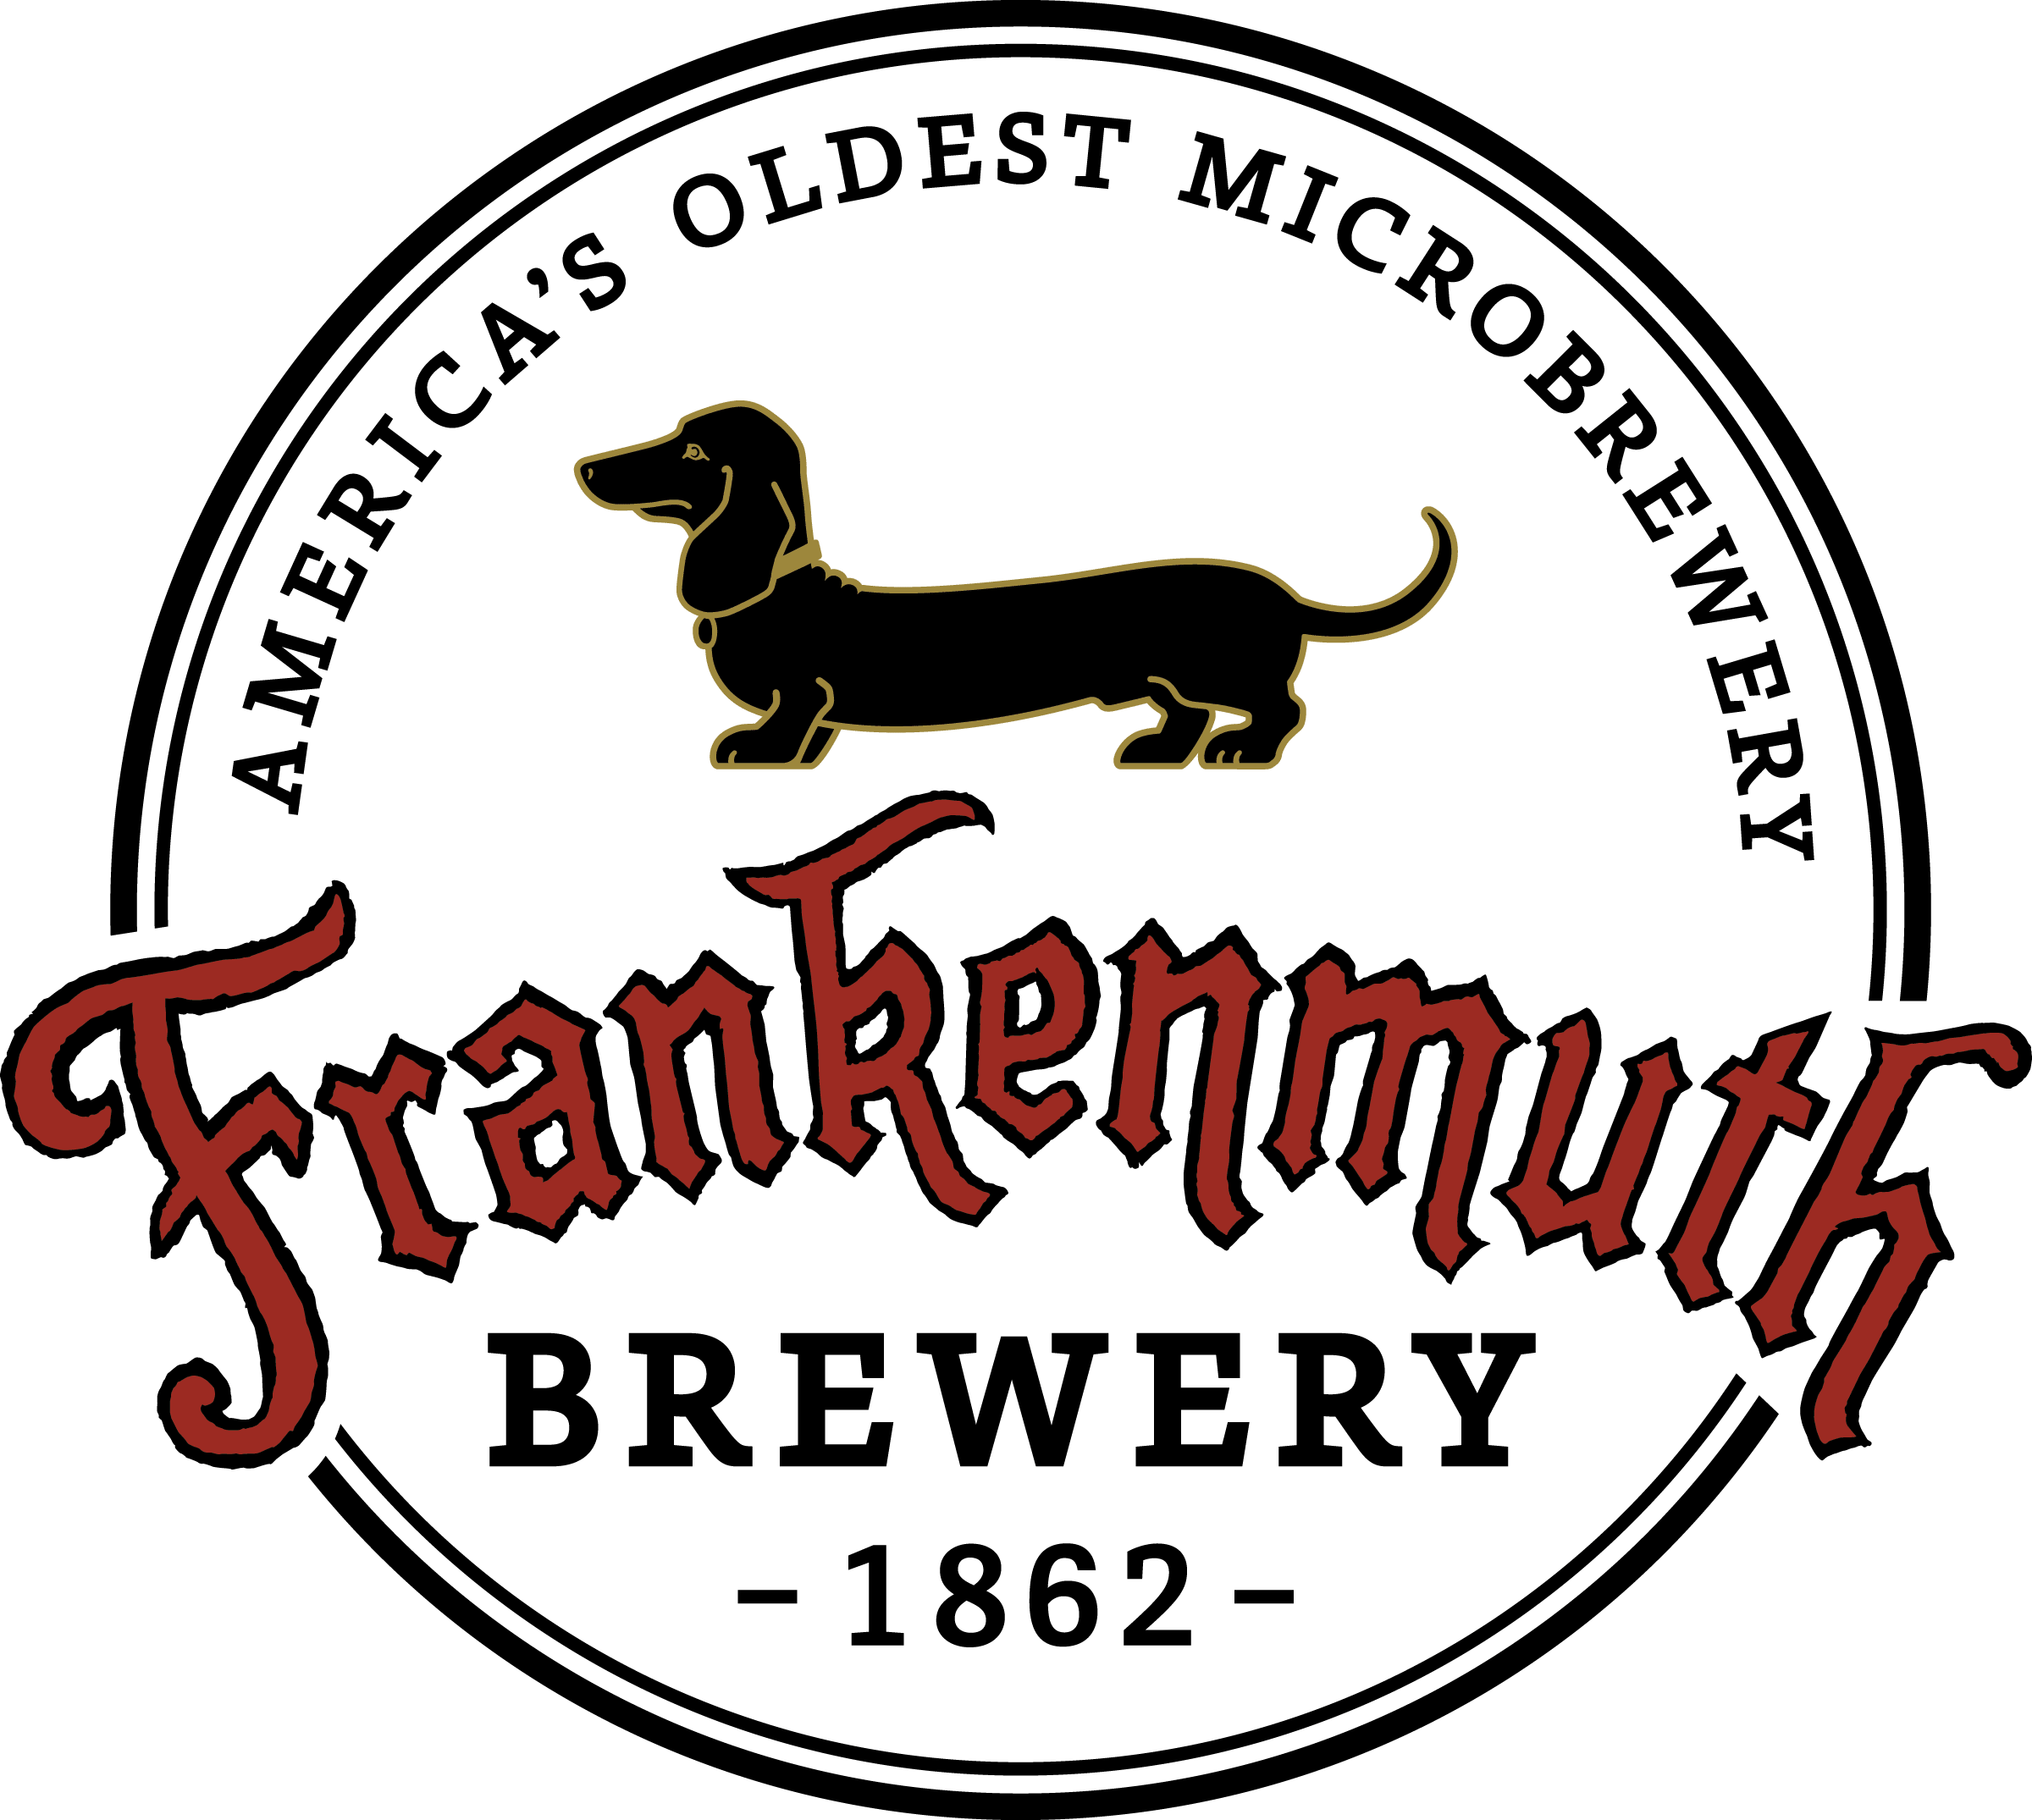 Old Red Dog Beer Logo - Oldest Brewery in Michigan. Frankenmuth Brewery